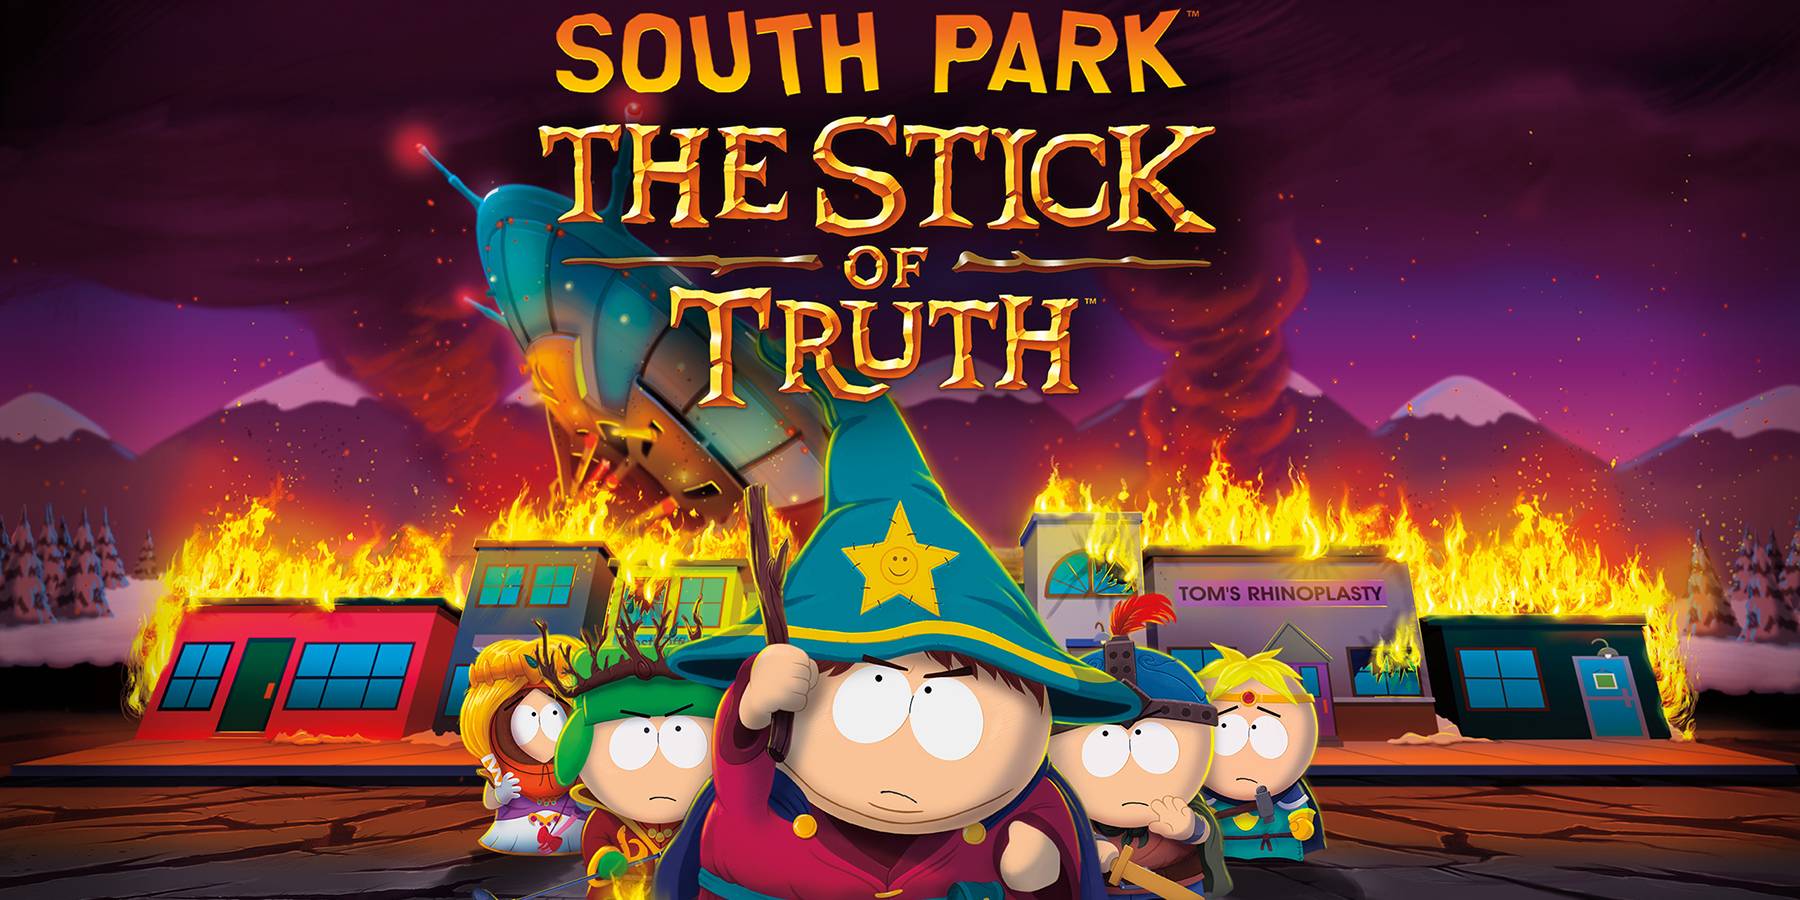 South park the stick of truth homeless